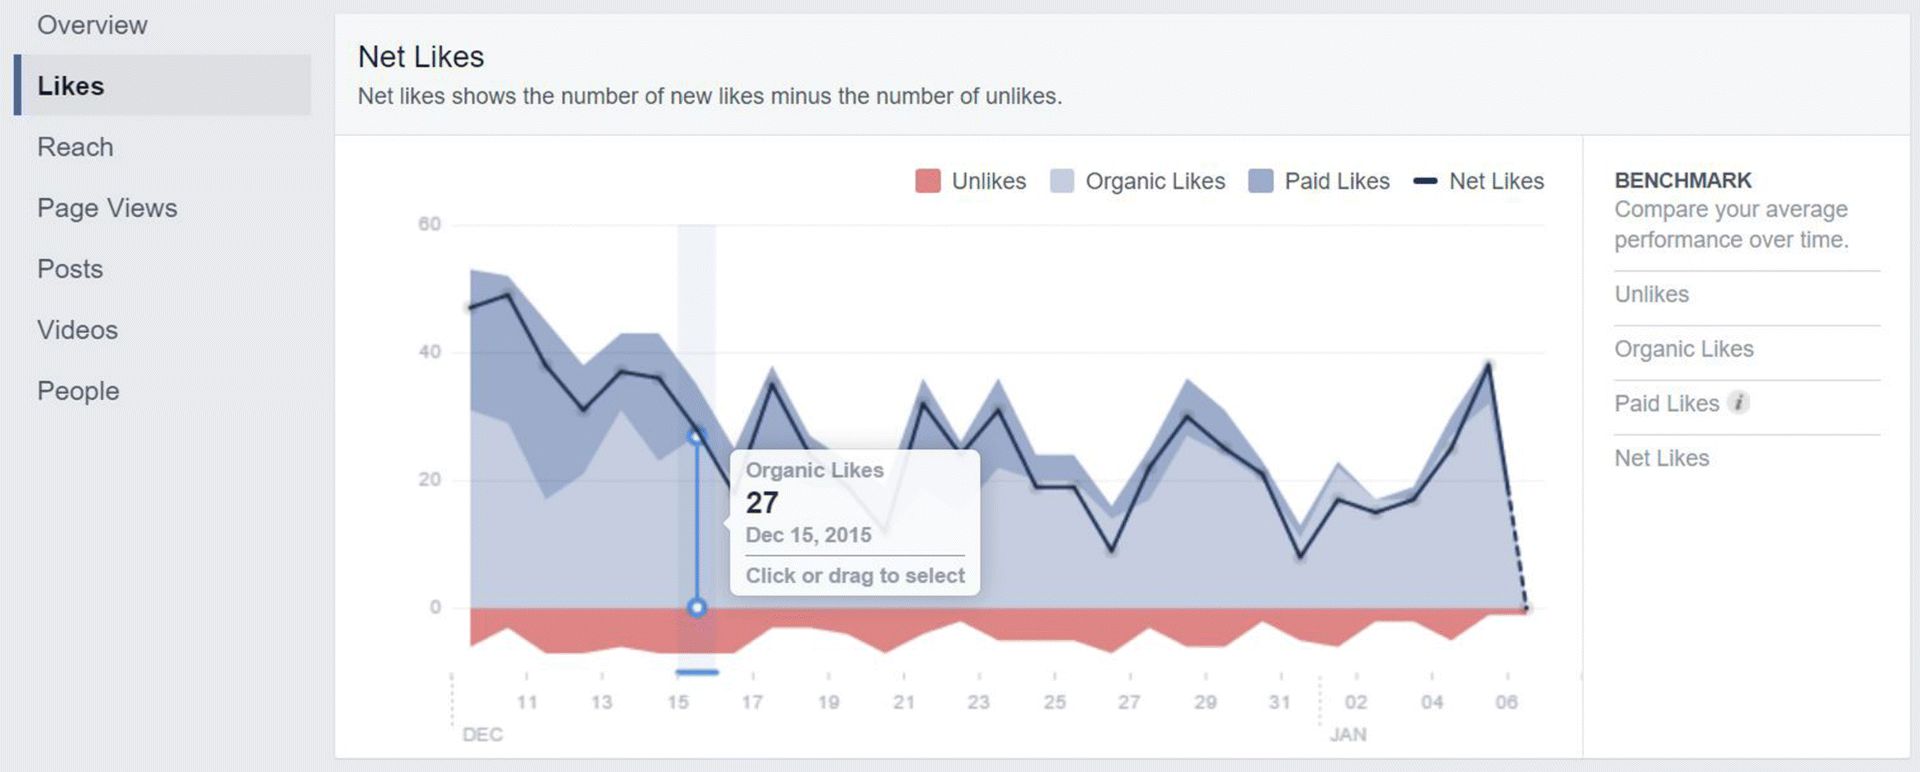 A screenshot image depicting net likes within Facebook insights likes tab